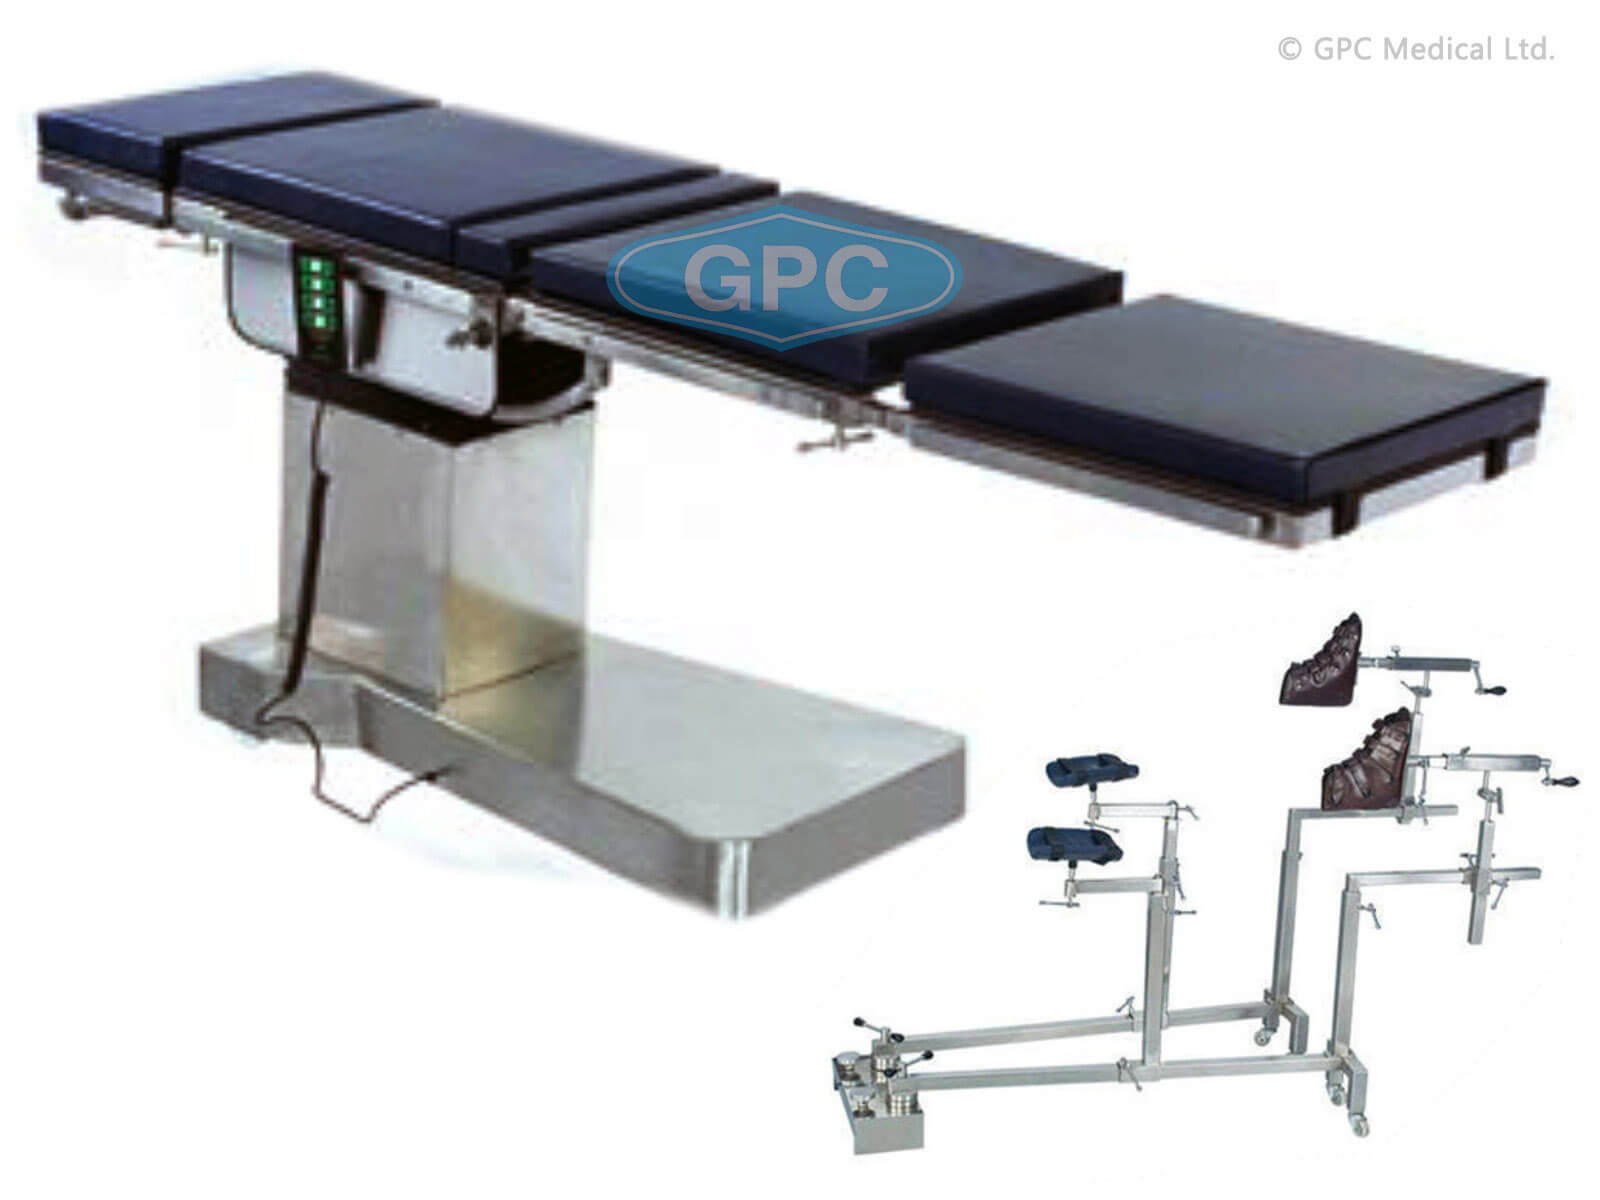 Electric C-Arm Table – 4 Function